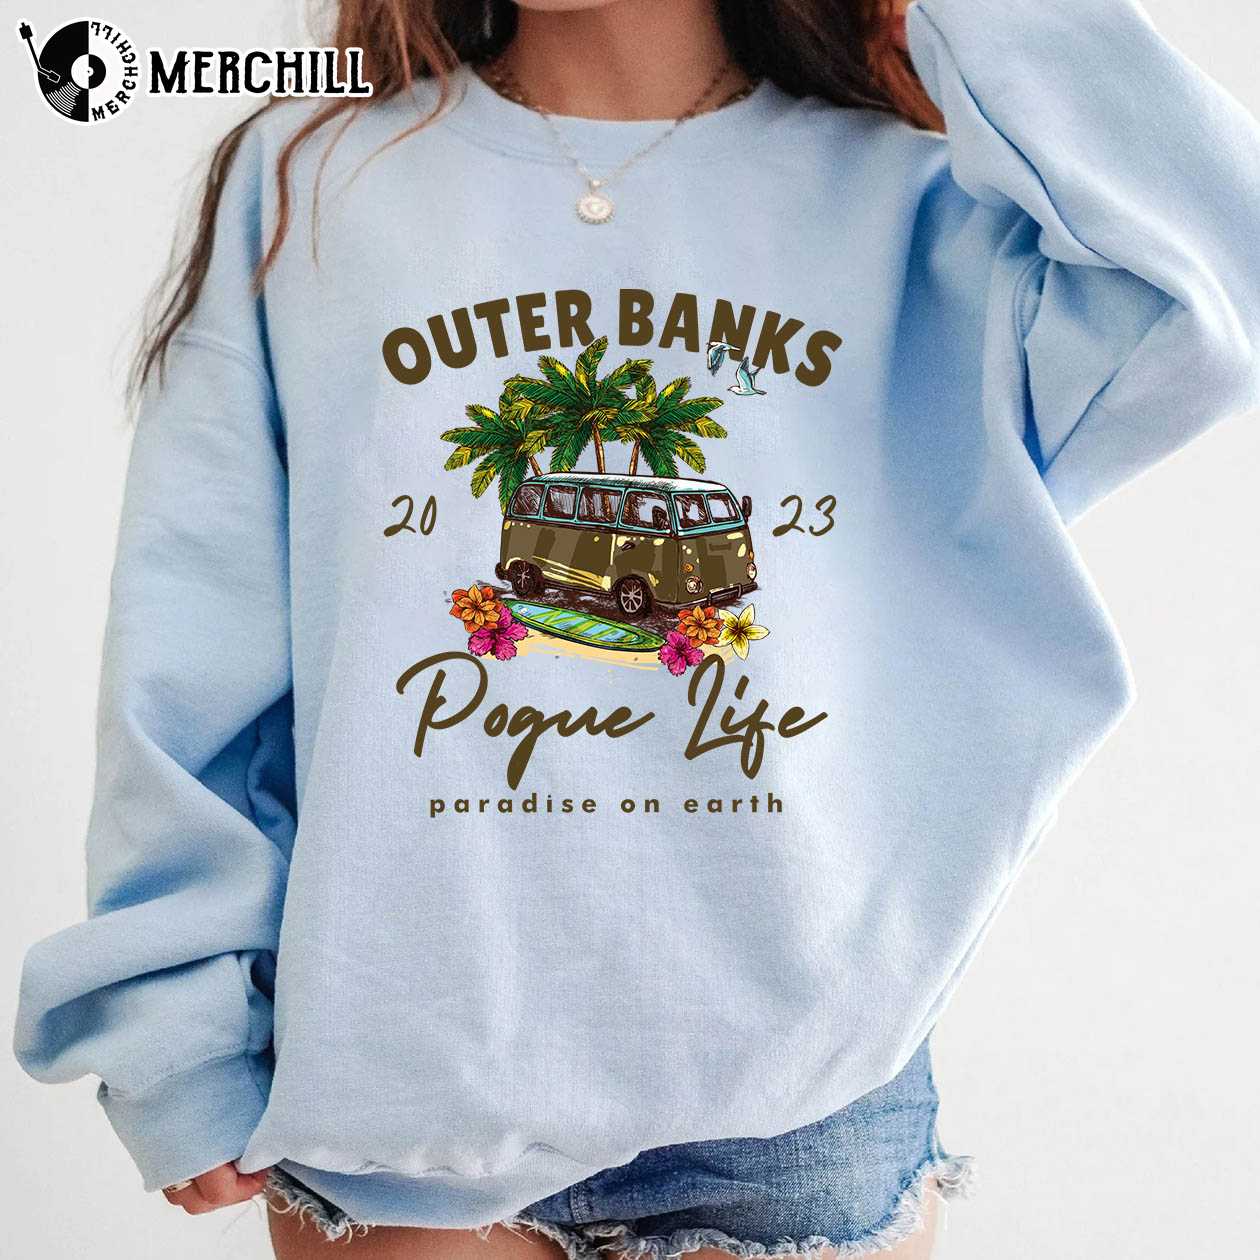 OBX Outer Banks Pogue Life Vintage 90s Tee Shirt, Paradise On